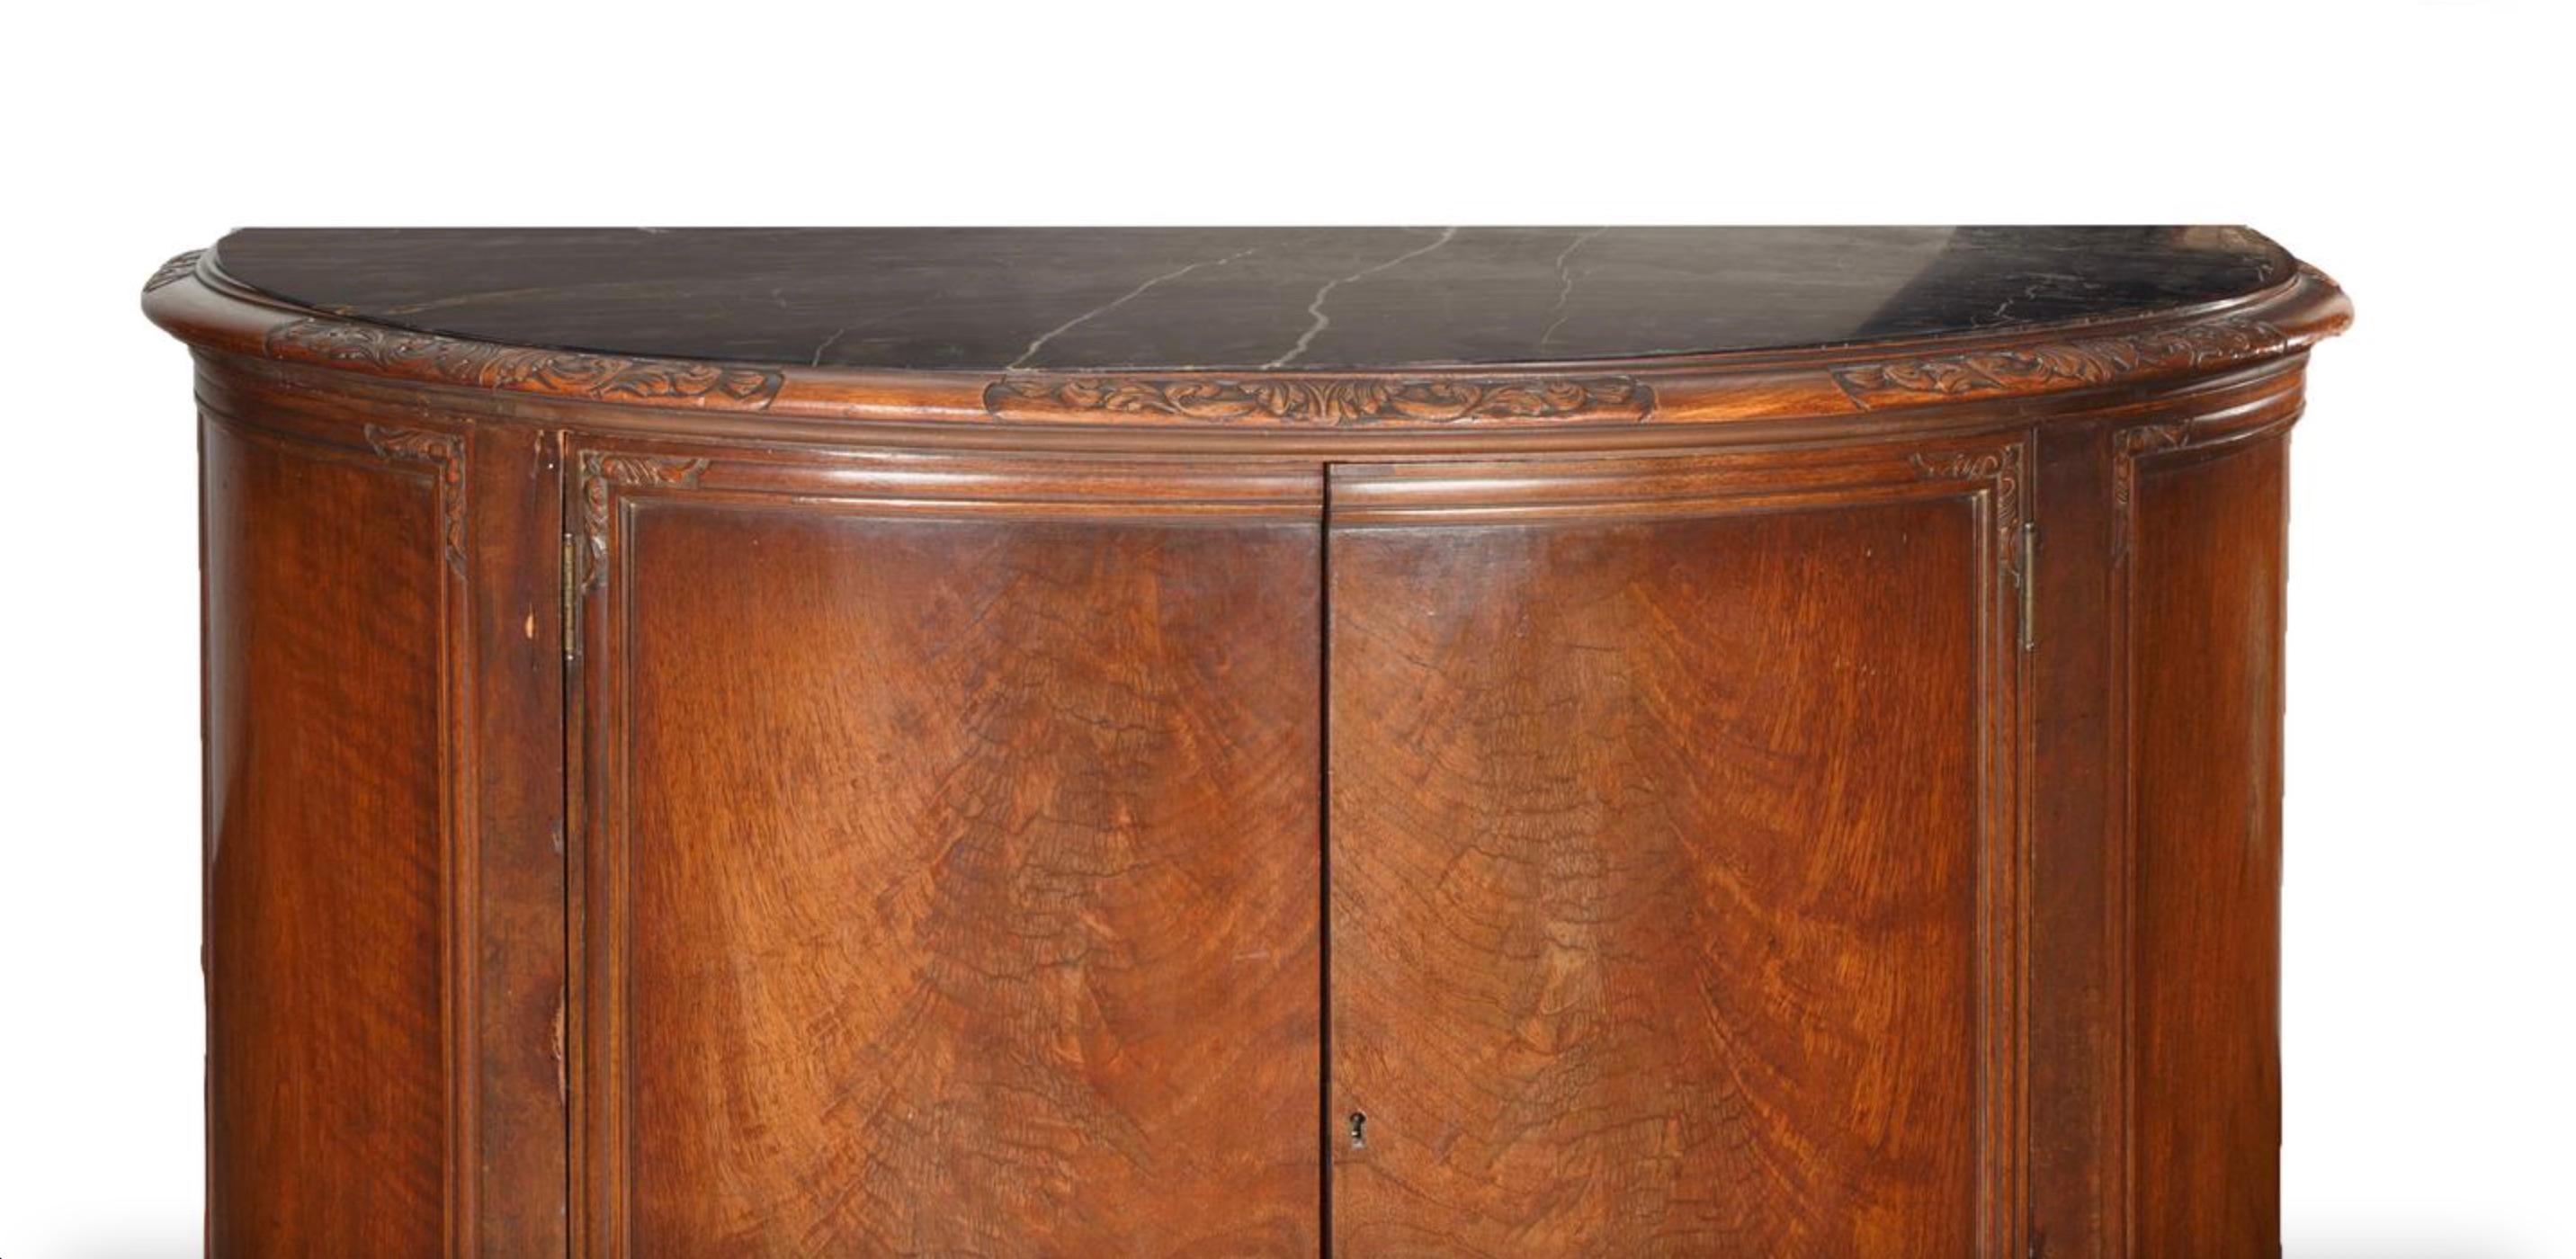 19th Century French Mahogany Wood Demilune Shape Marble Inserted Top Sideboard / Server For Sale